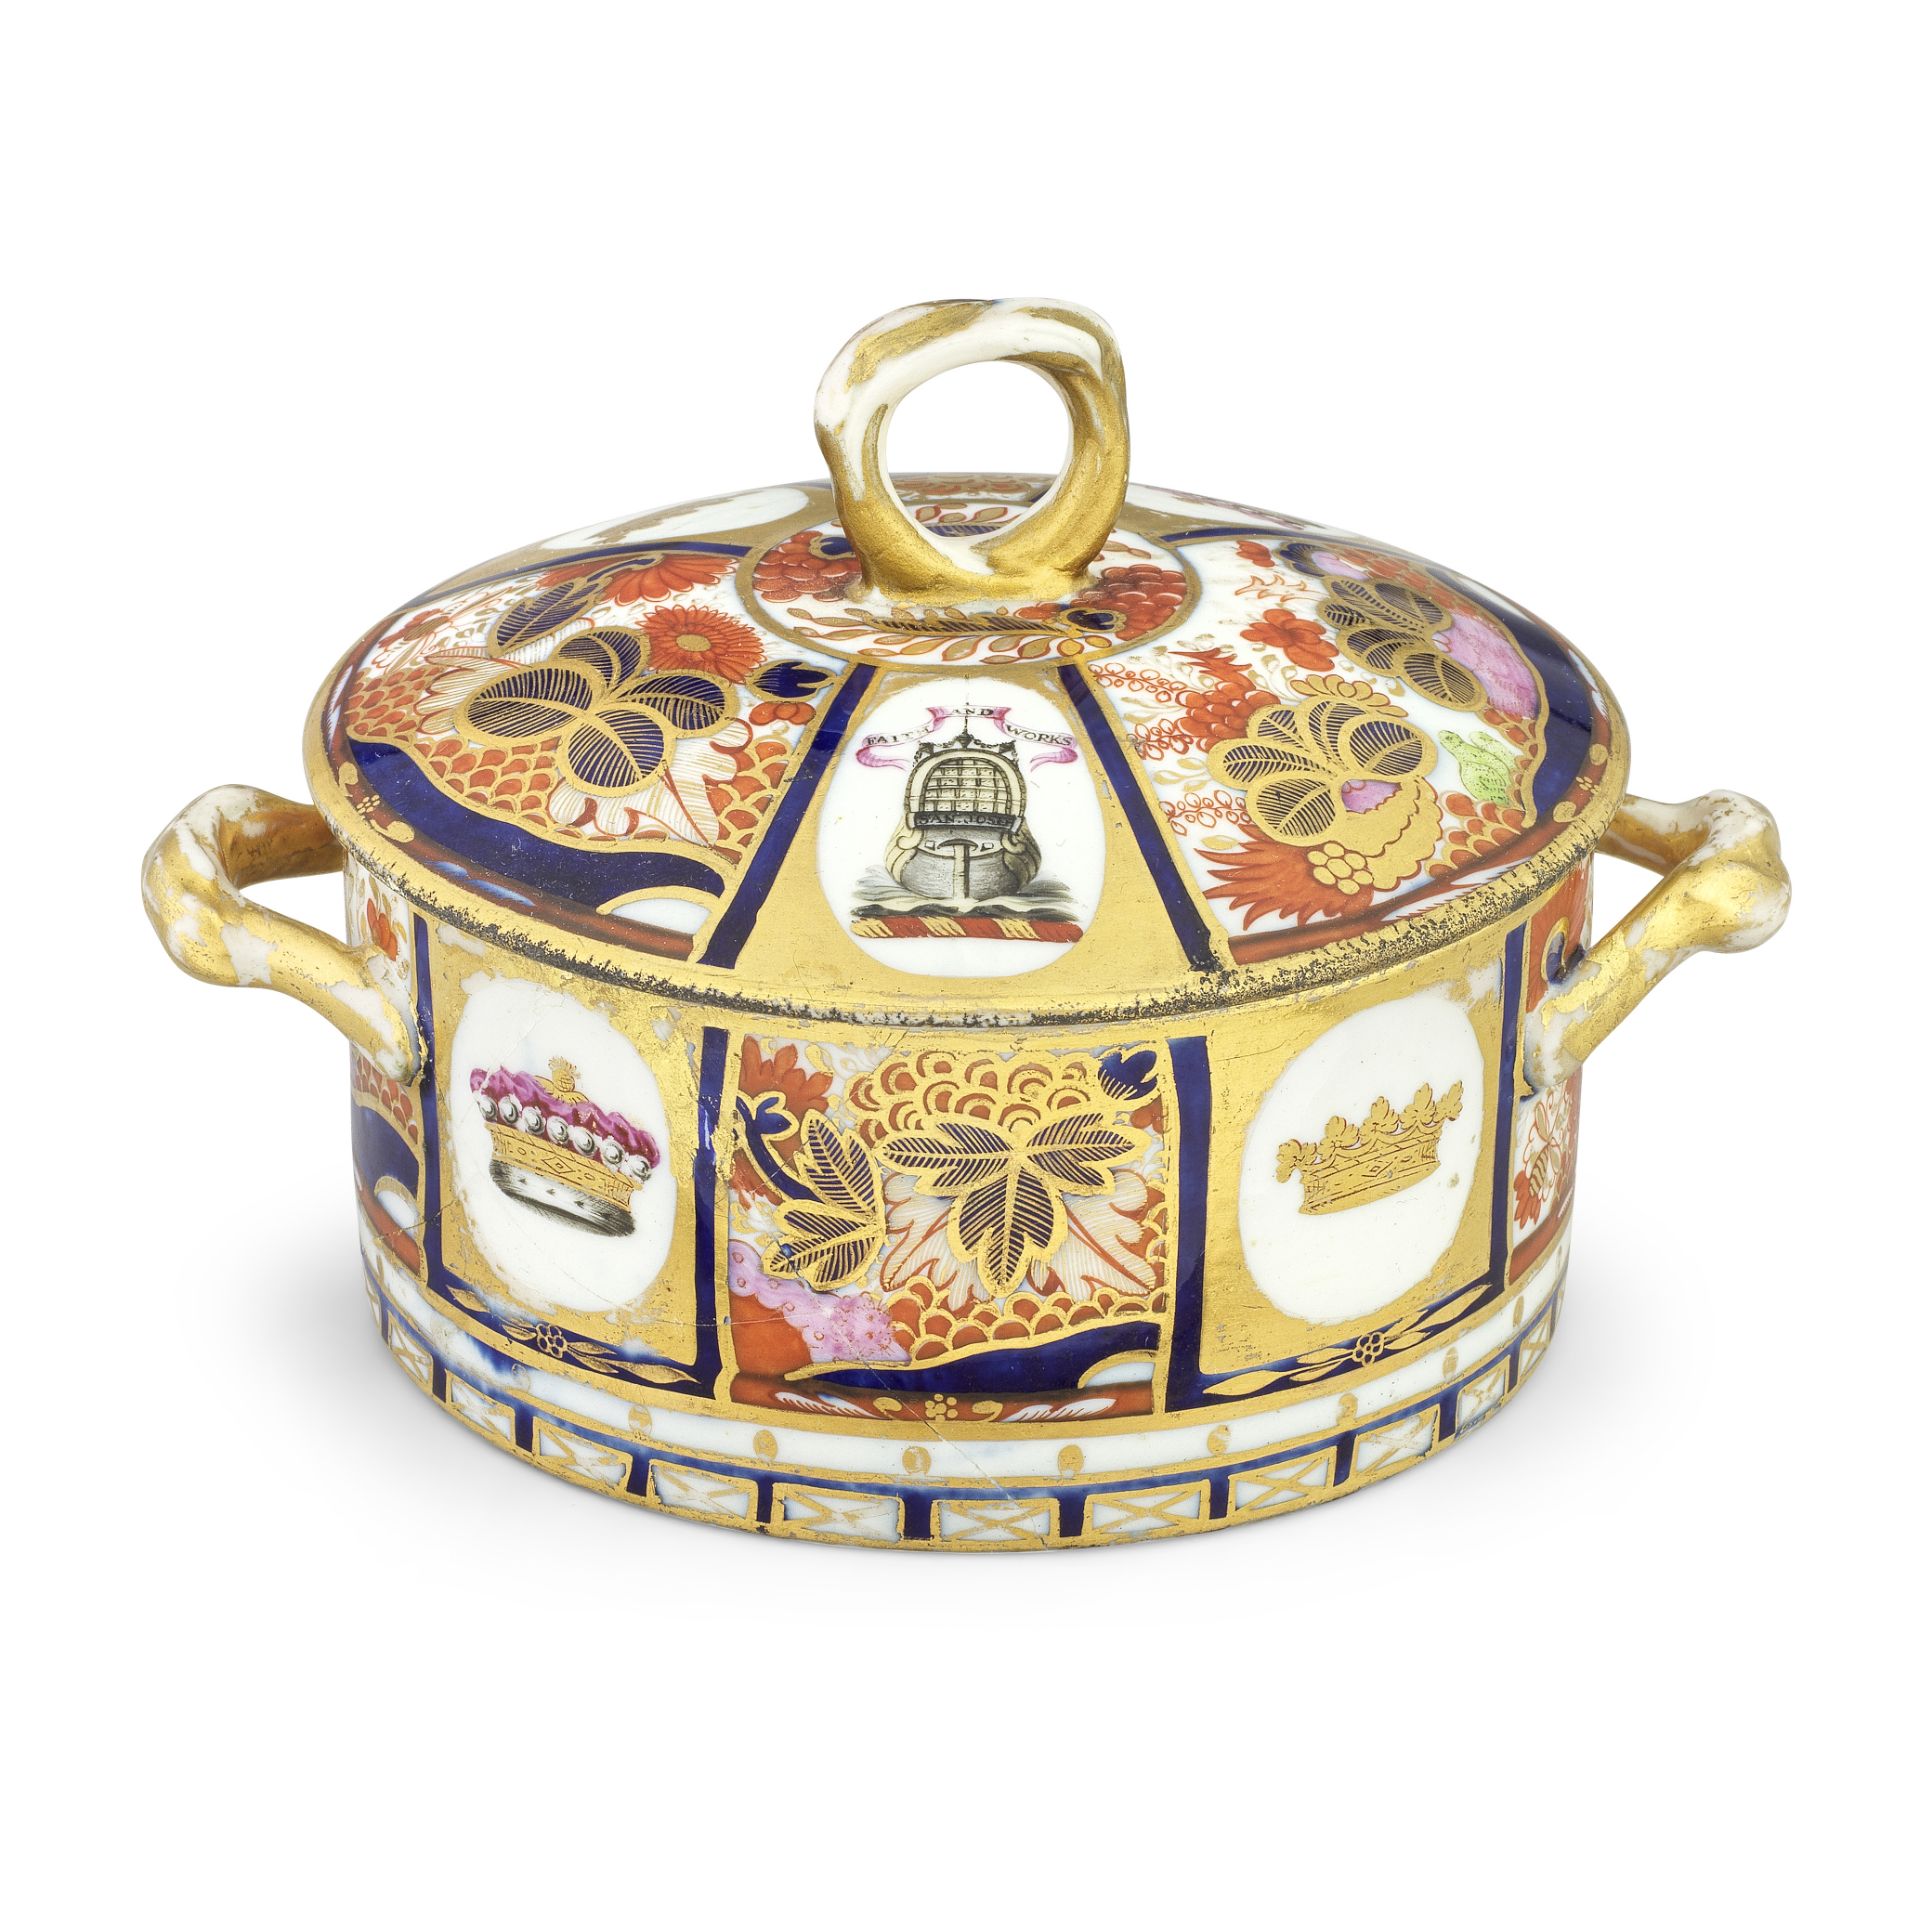 A Chamberlain Worcester butter tub and cover from the 'Horatia Service', circa 1802-03